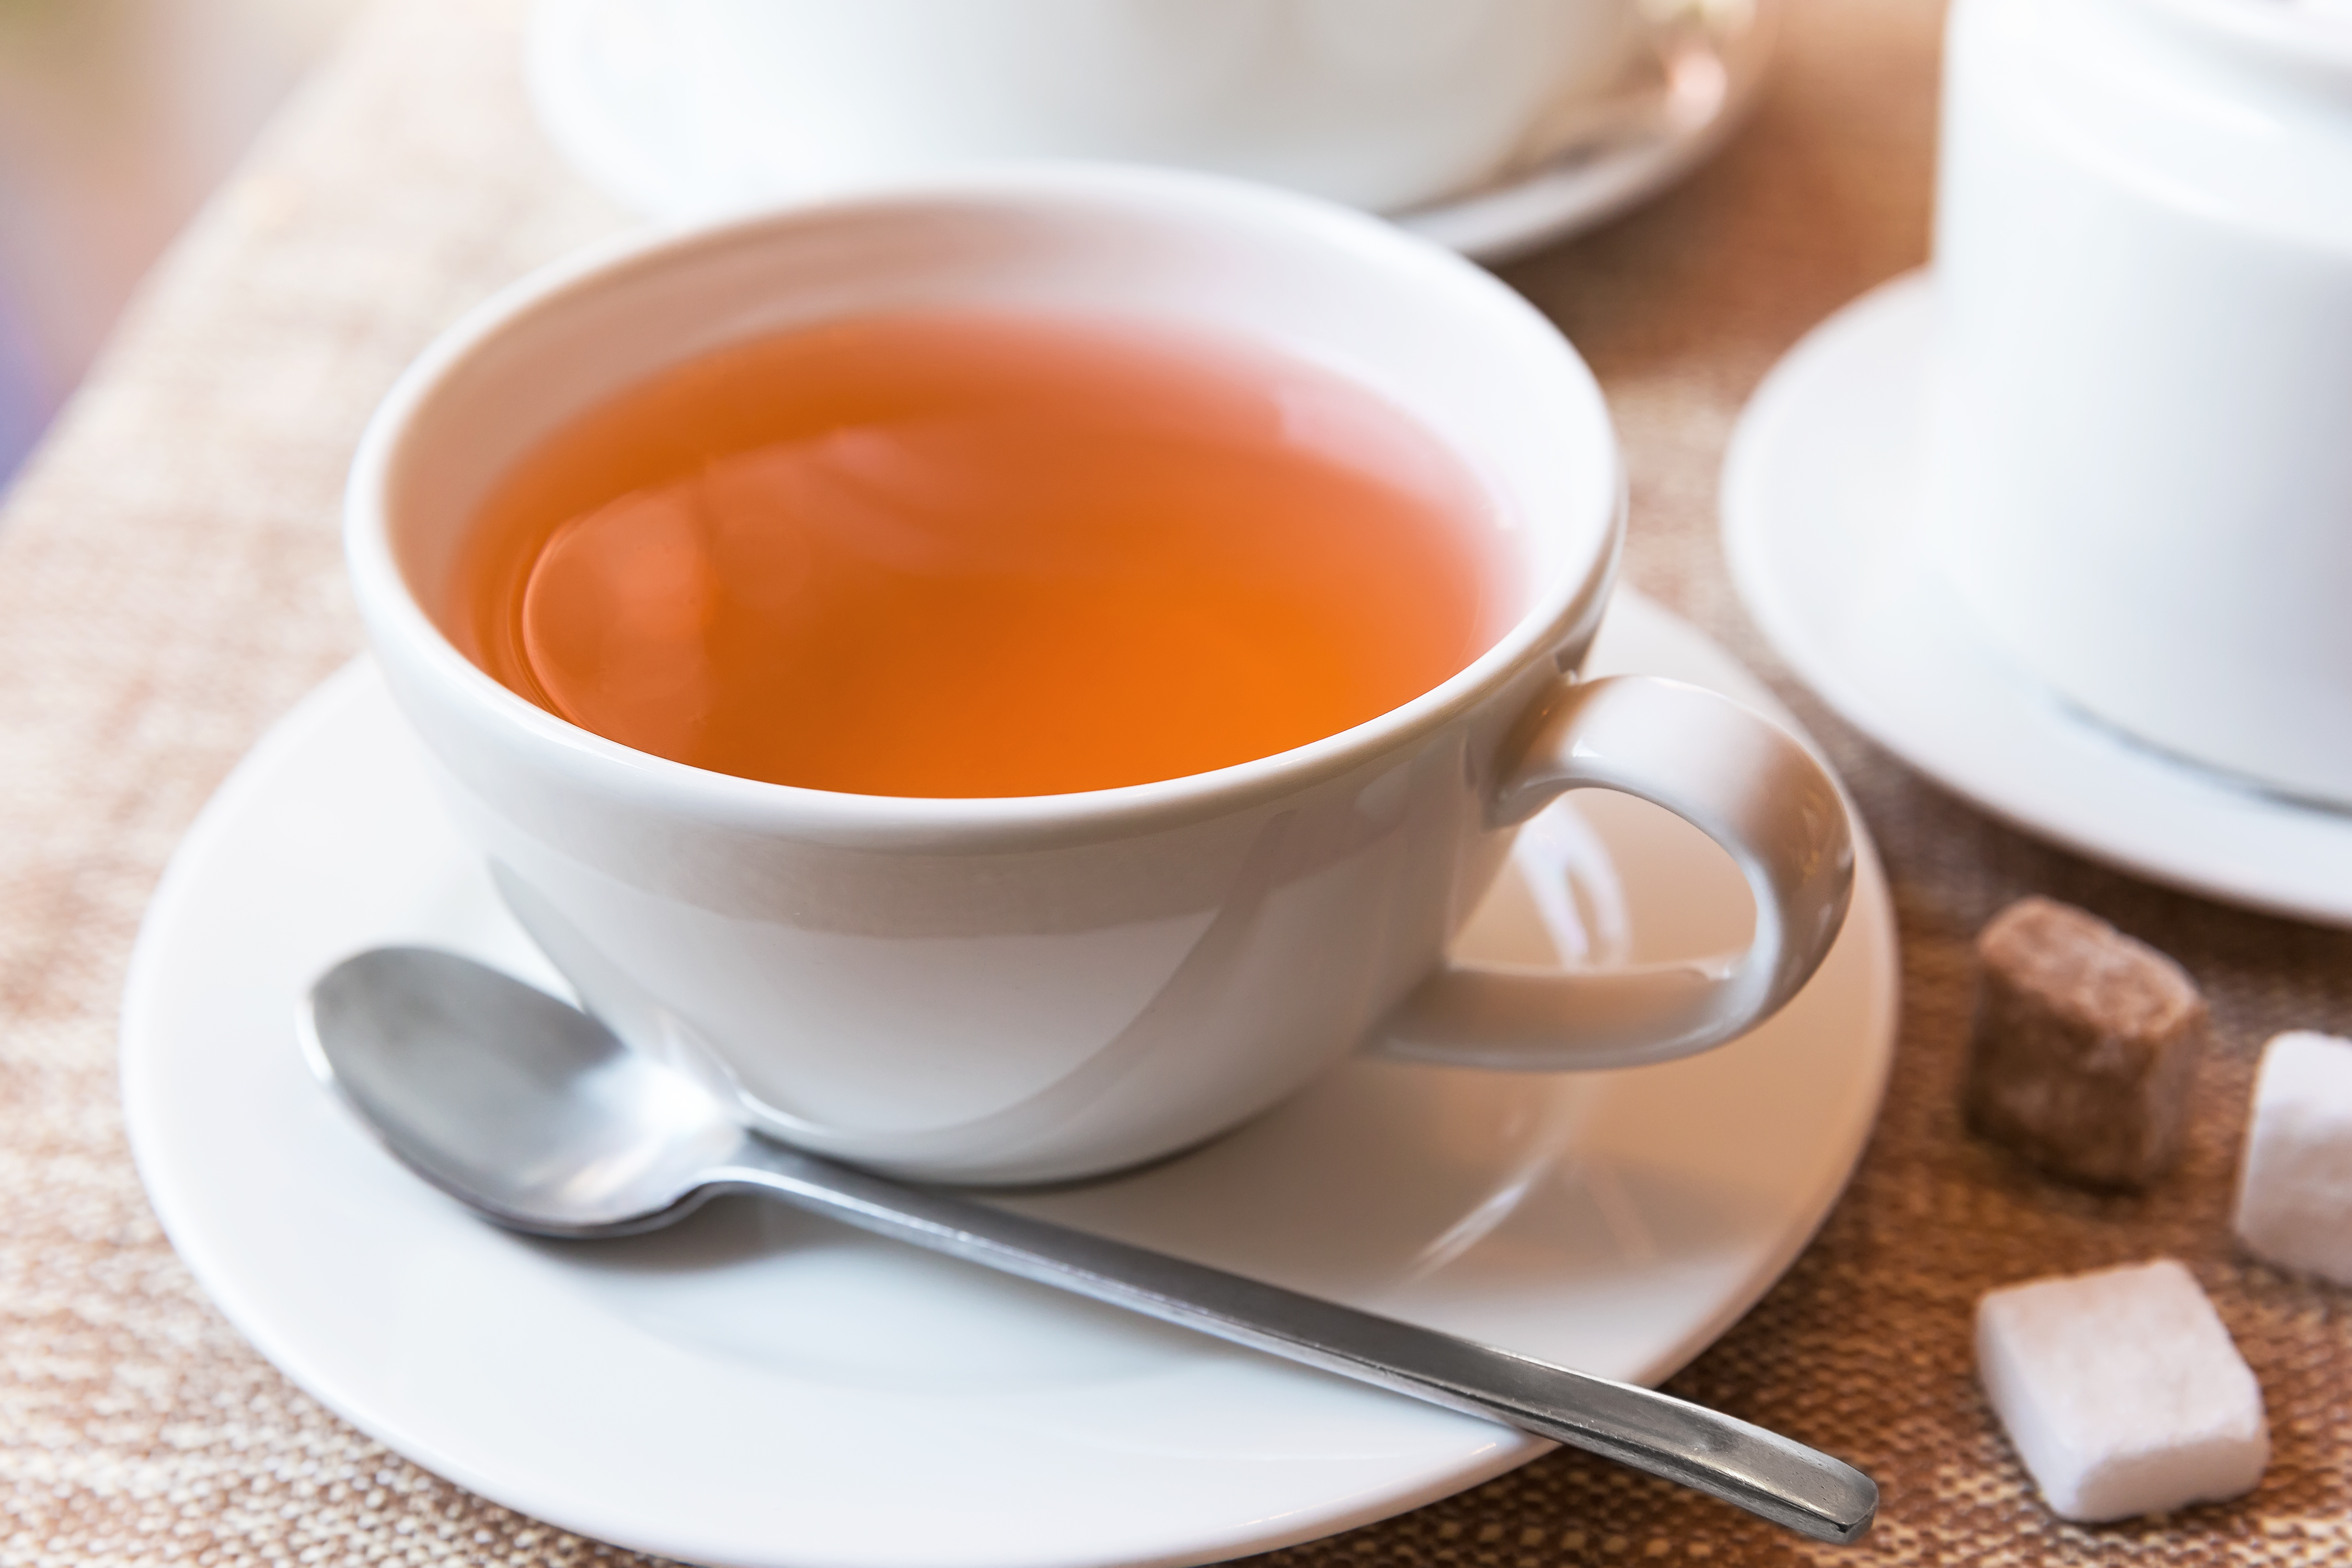 The perfect sip: Tea’s rise from kitchen table to VIP brew